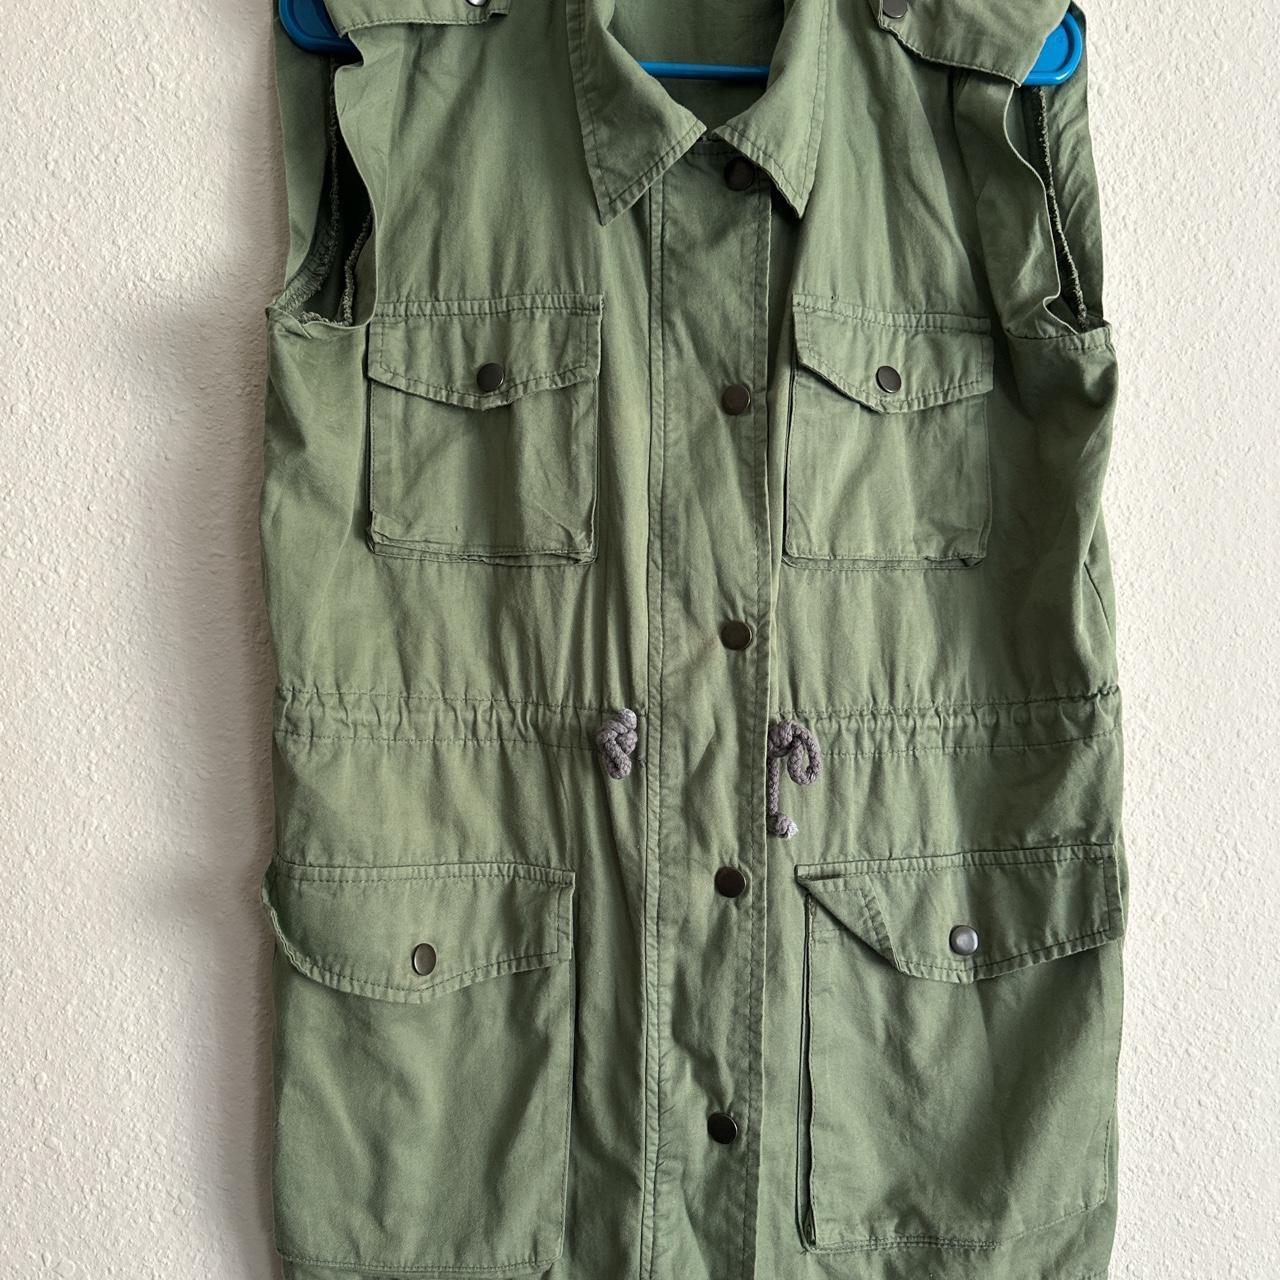 Cargo Fishing Vest Olive green and black with - Depop